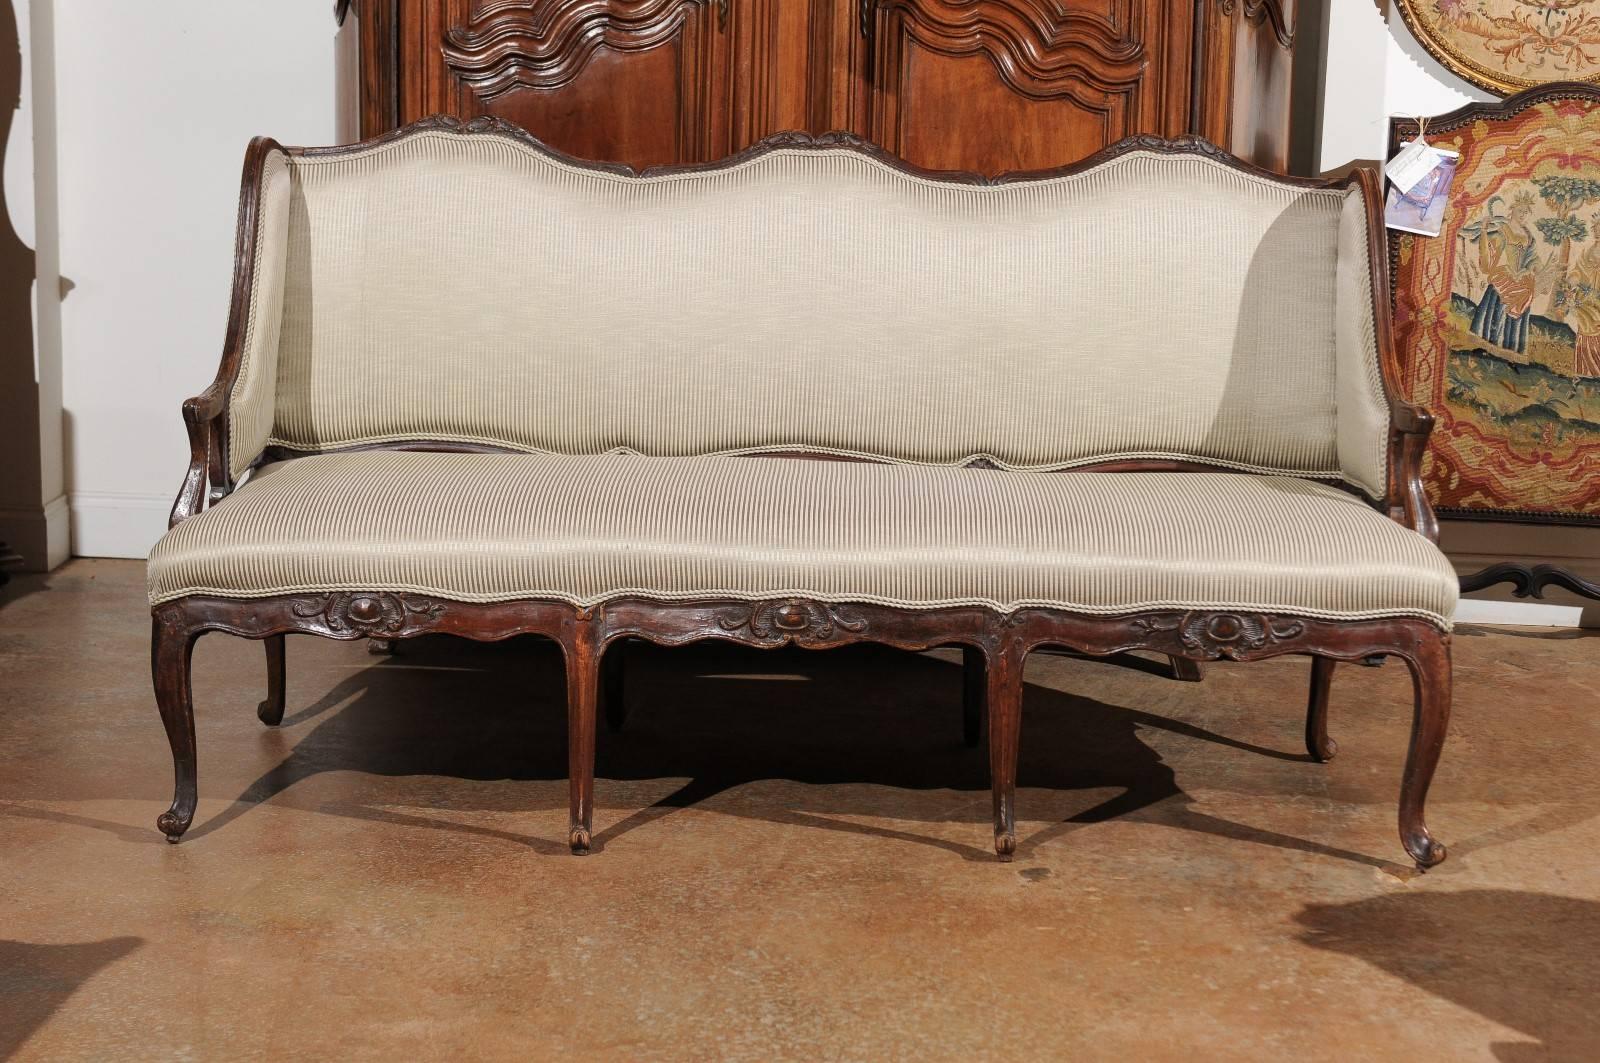 A French Régence period walnut three-seat canapé à oreilles from the early 18th century with carved skirt and new upholstery. This French canapé was born during the short years of the Régence that saw the transition of power between feu King Louis